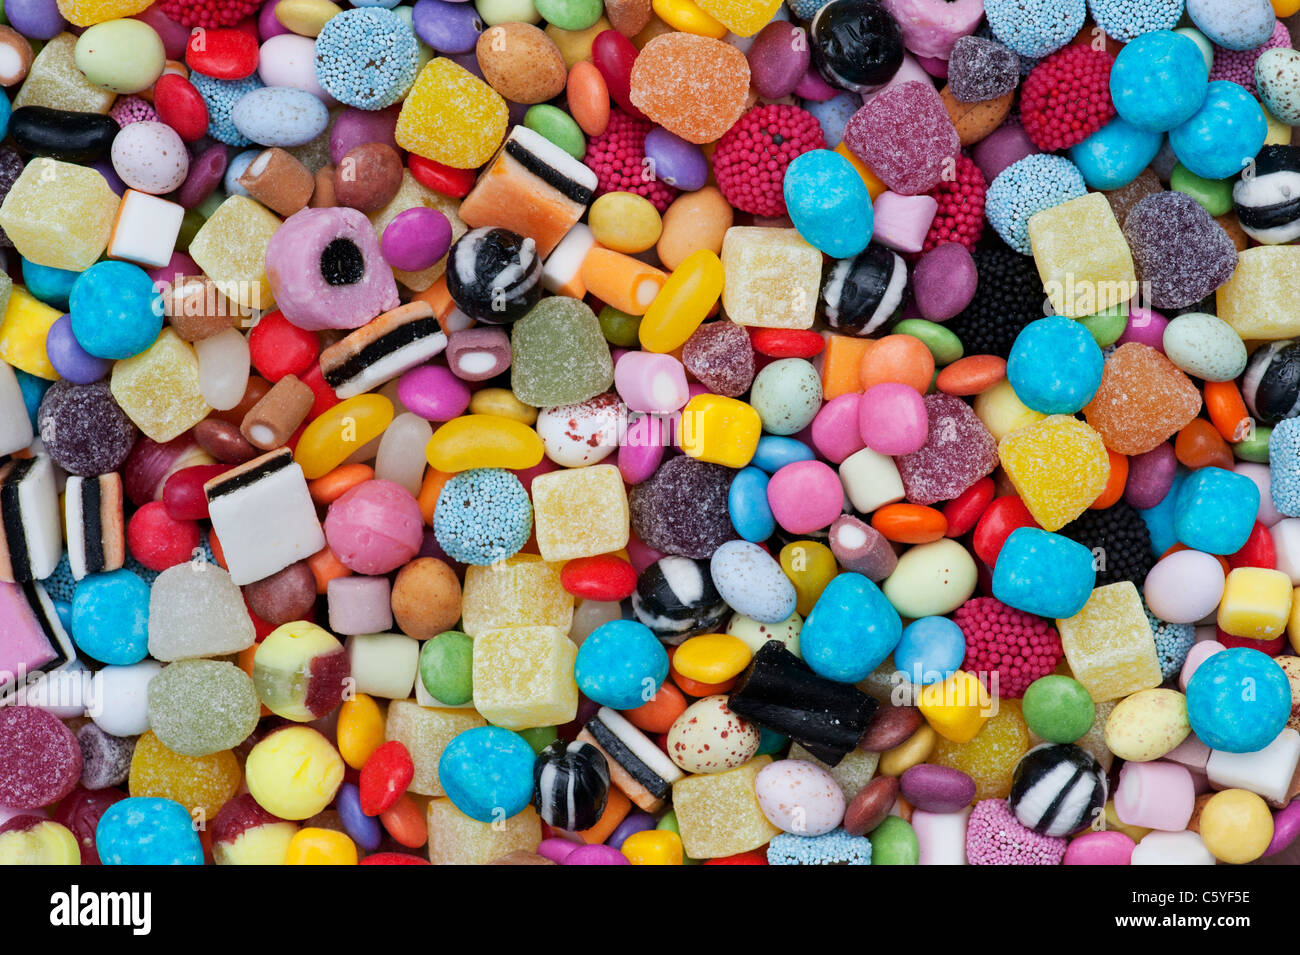 Colourful childrens sweets pattern. Liquorice allsorts, Smarties, pineapple cubes, humbugs, bonbons, dolly mixtures and jelly beans Stock Photo